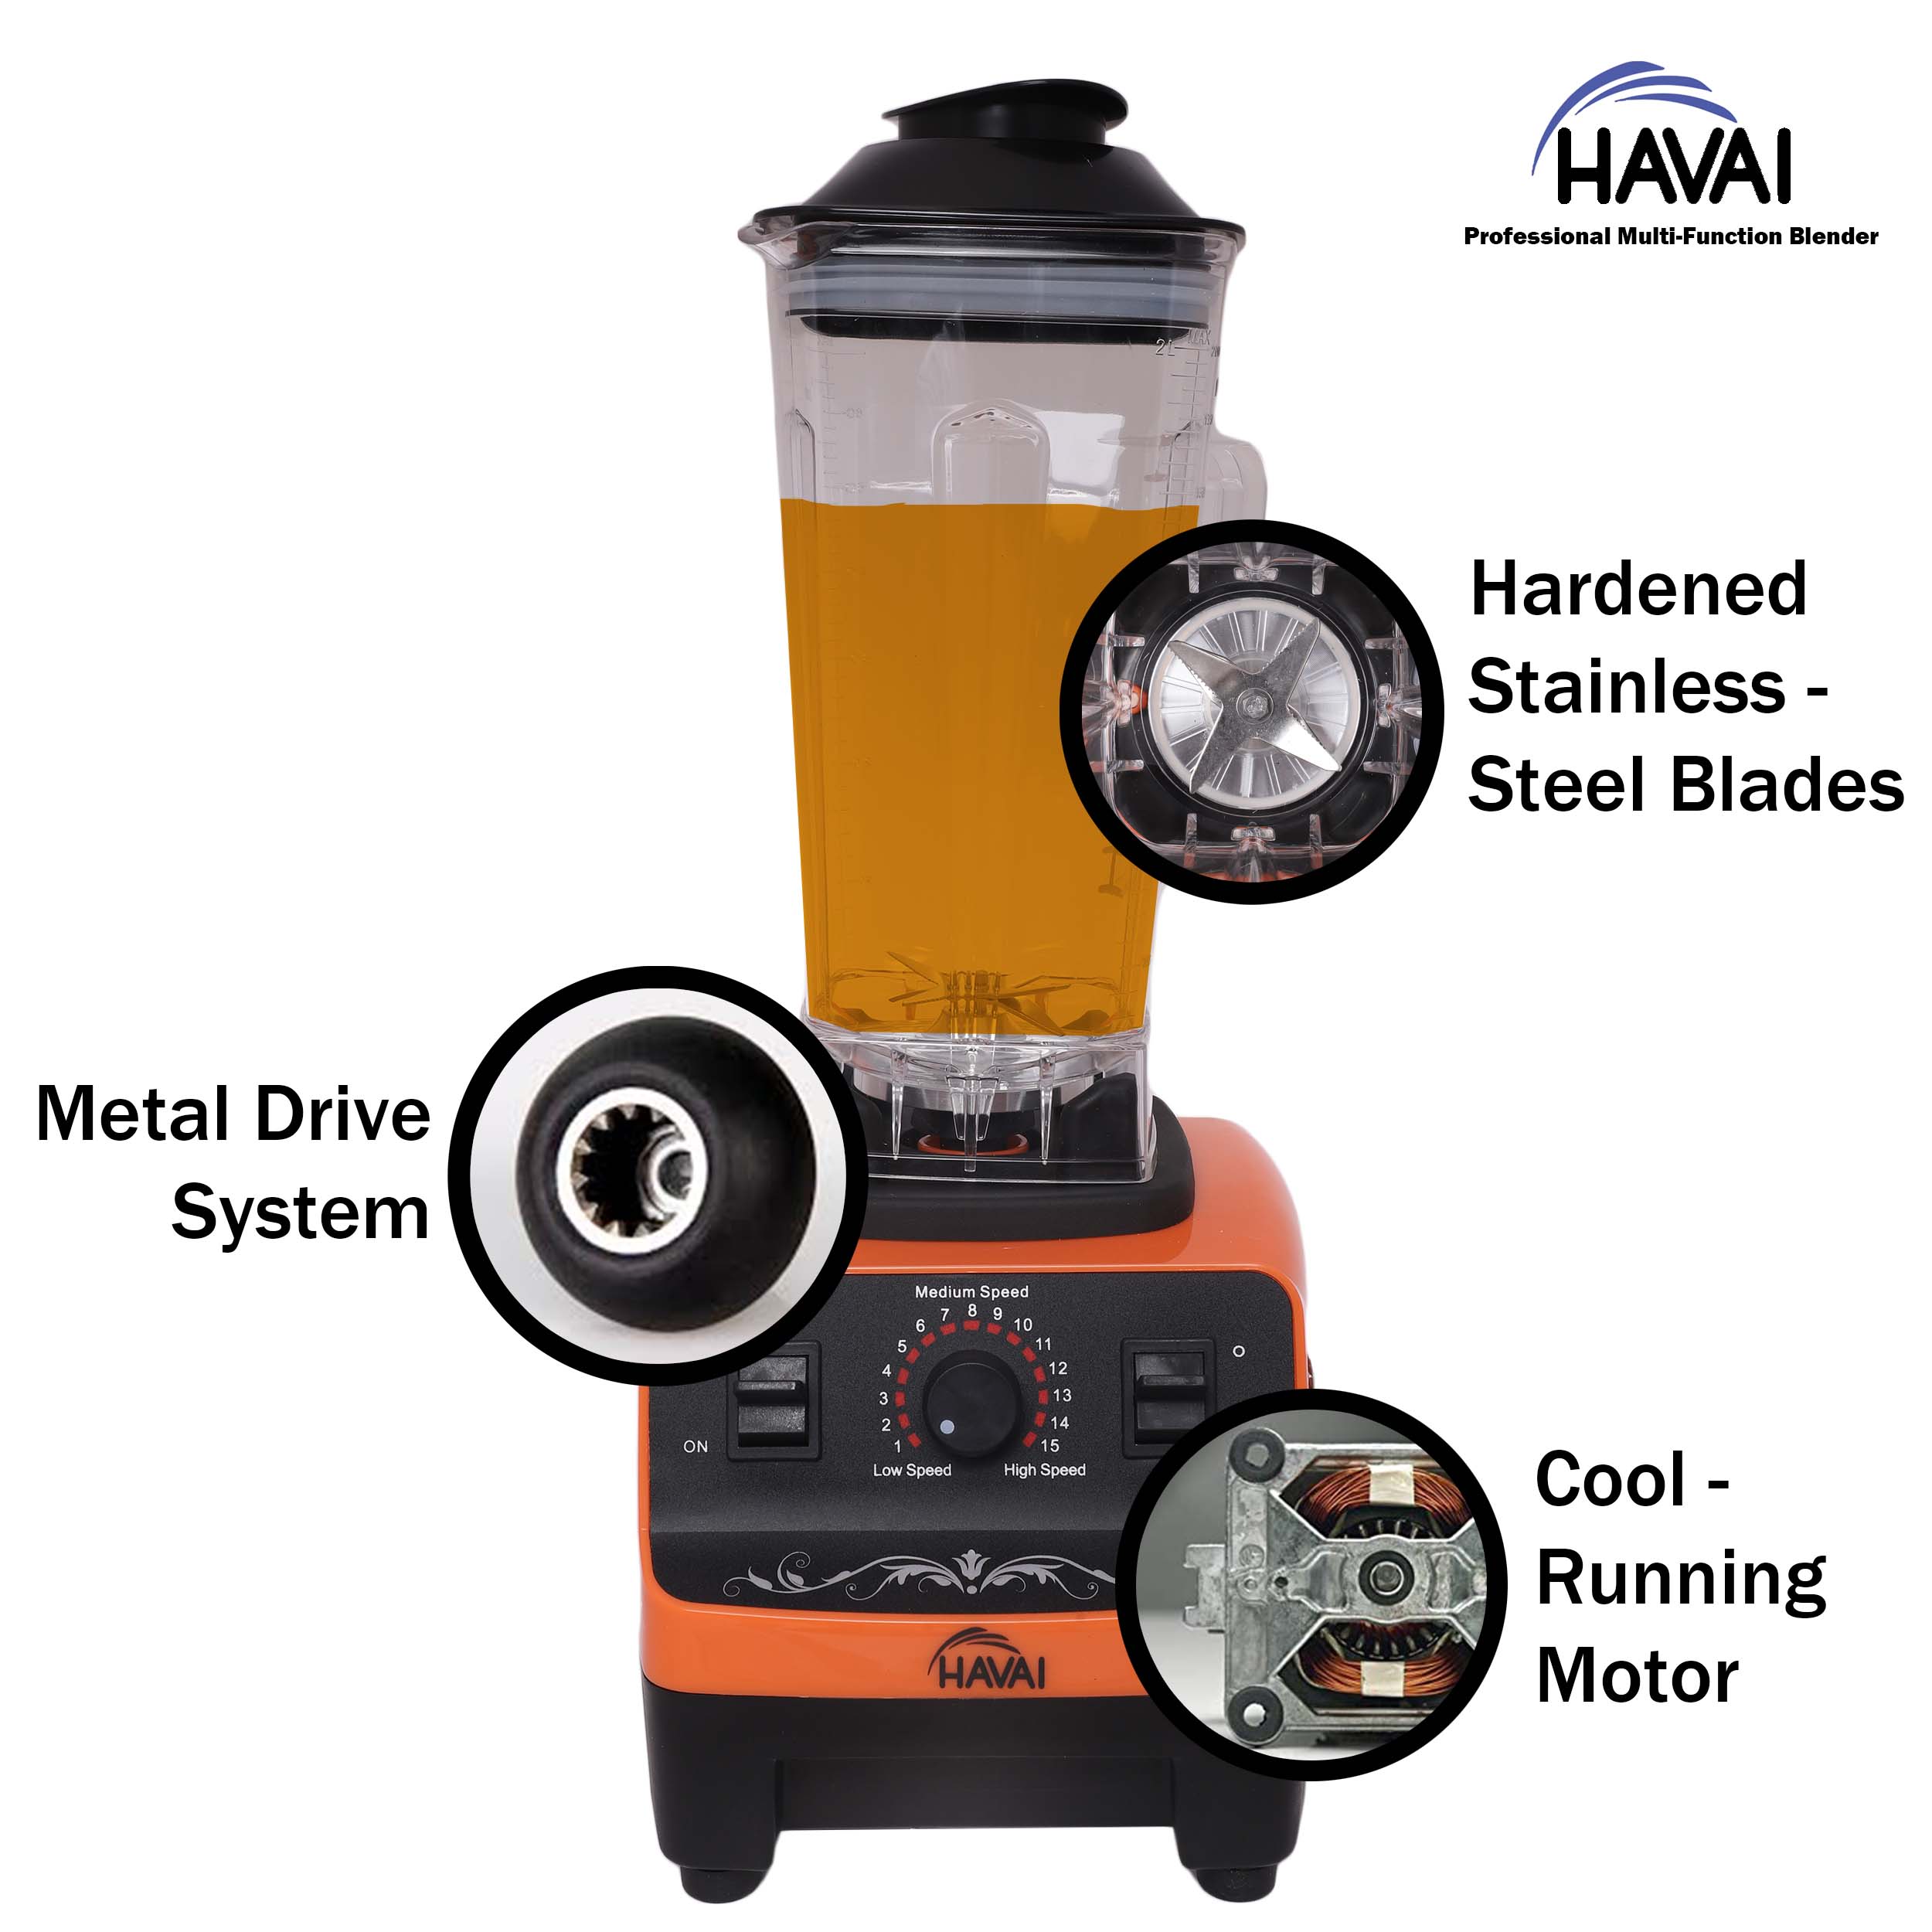 HAVAI Professional Heavy Duty Blender/Grinder/Mixer, 1200W, 2 Litres BPA Free Jar, Crush Ice - Make Shakes, Grind Spices and Smoothies (ORANGE)